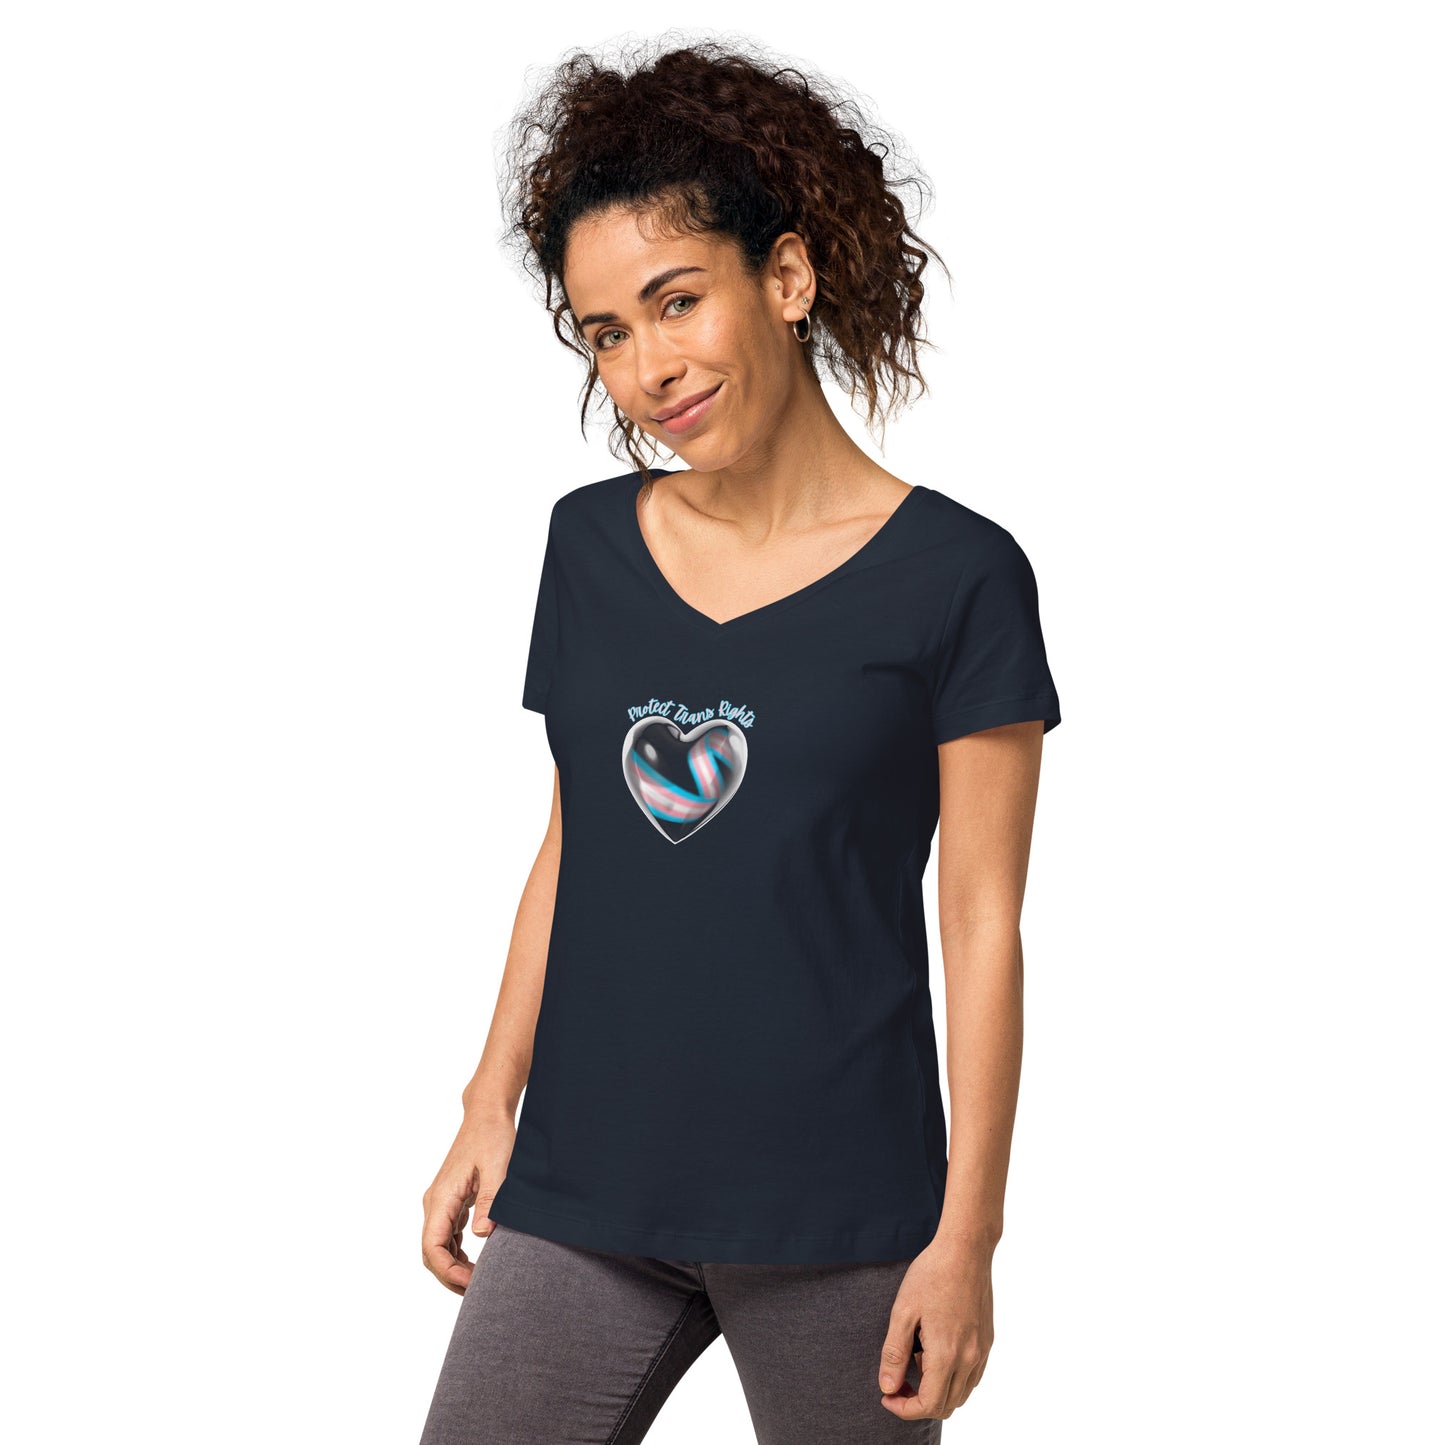 Protect Trans Rights - Women’s fitted v-neck t-shirt